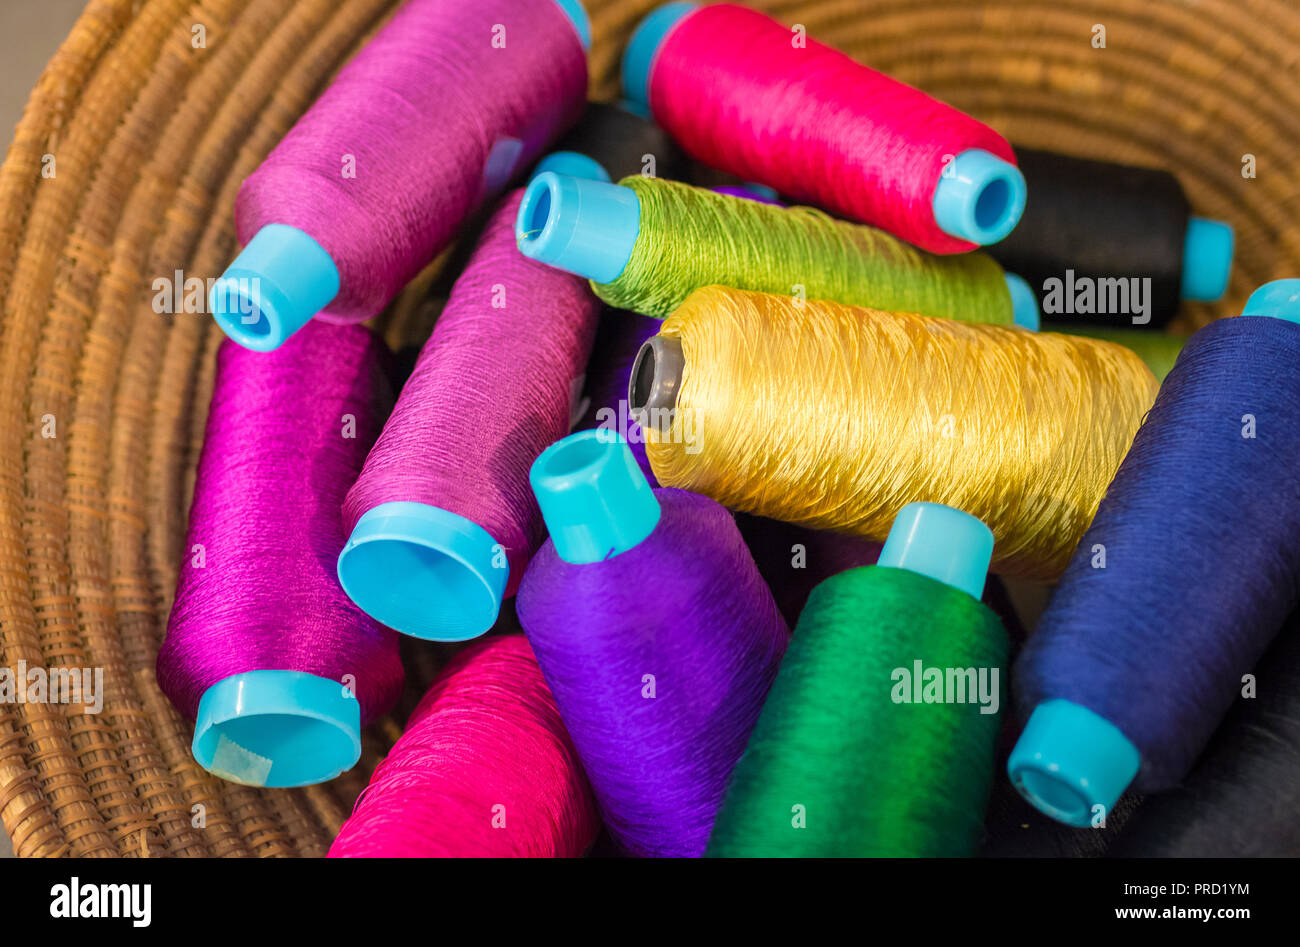 Close up of colorful spools of thread Stock Photo